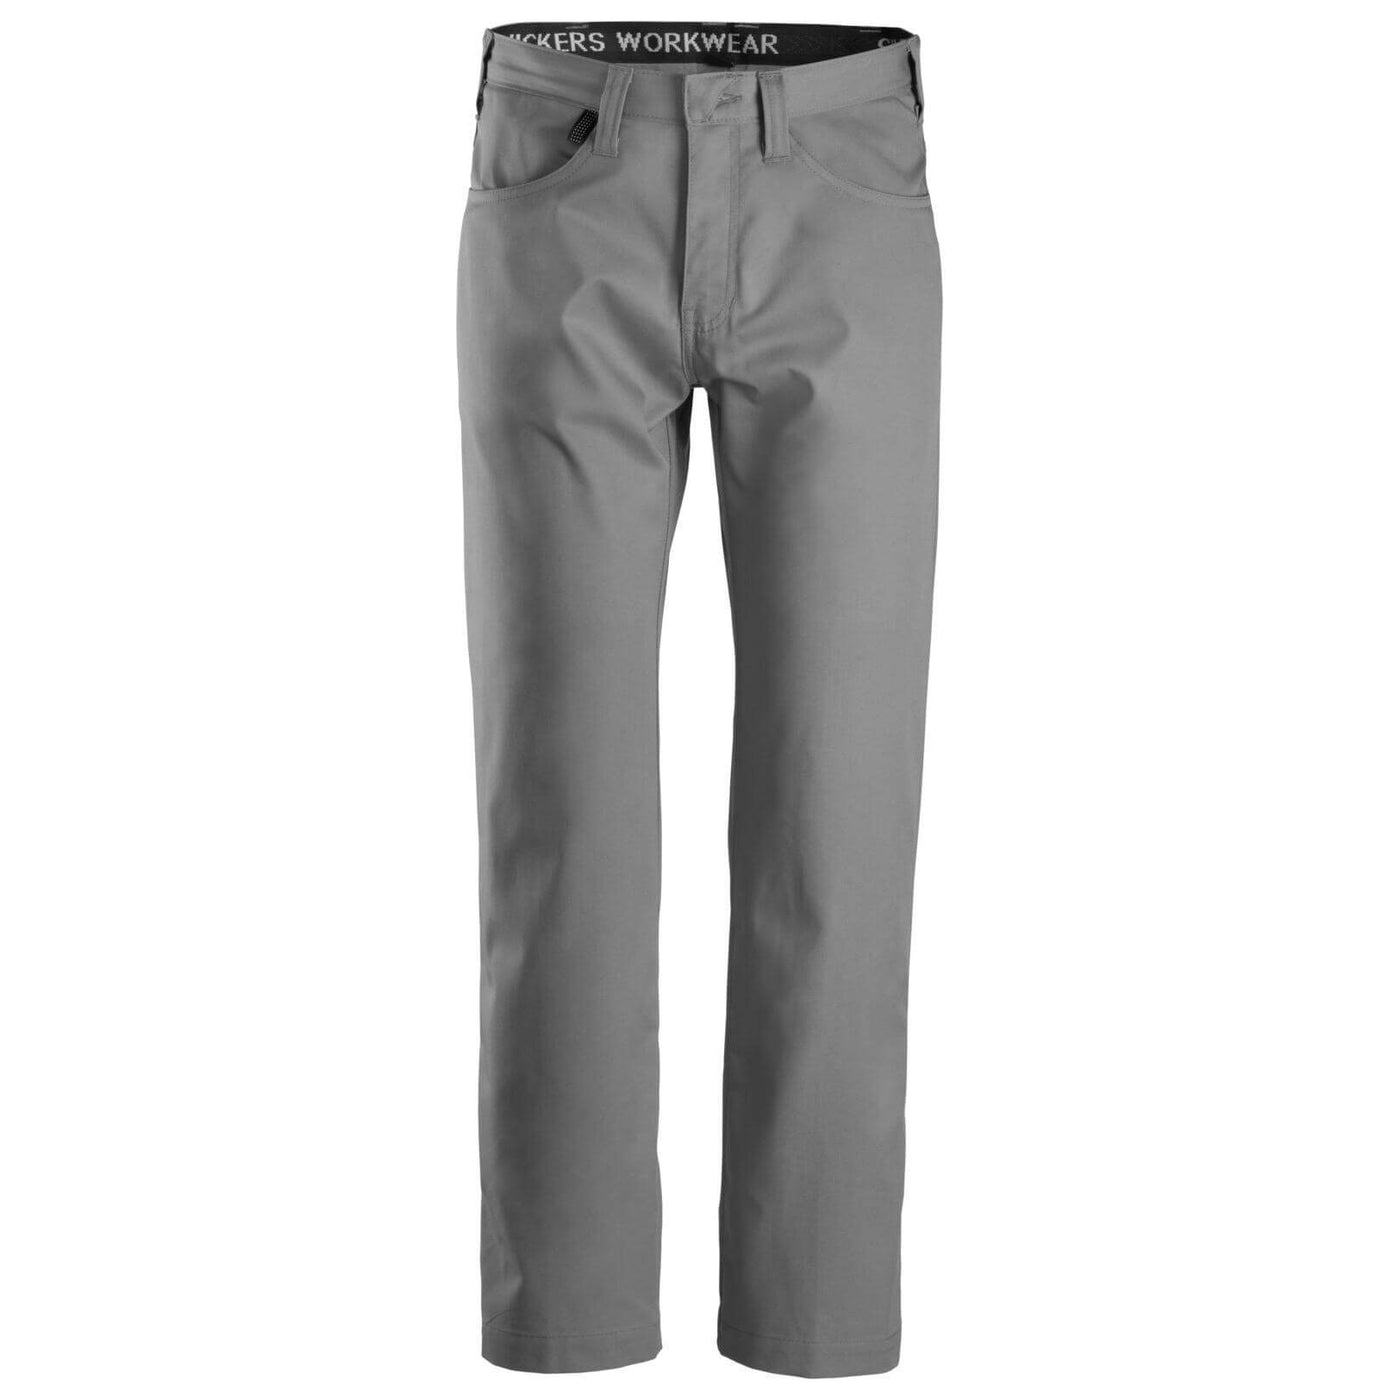 Snickers 6400 Service Chinos Grey